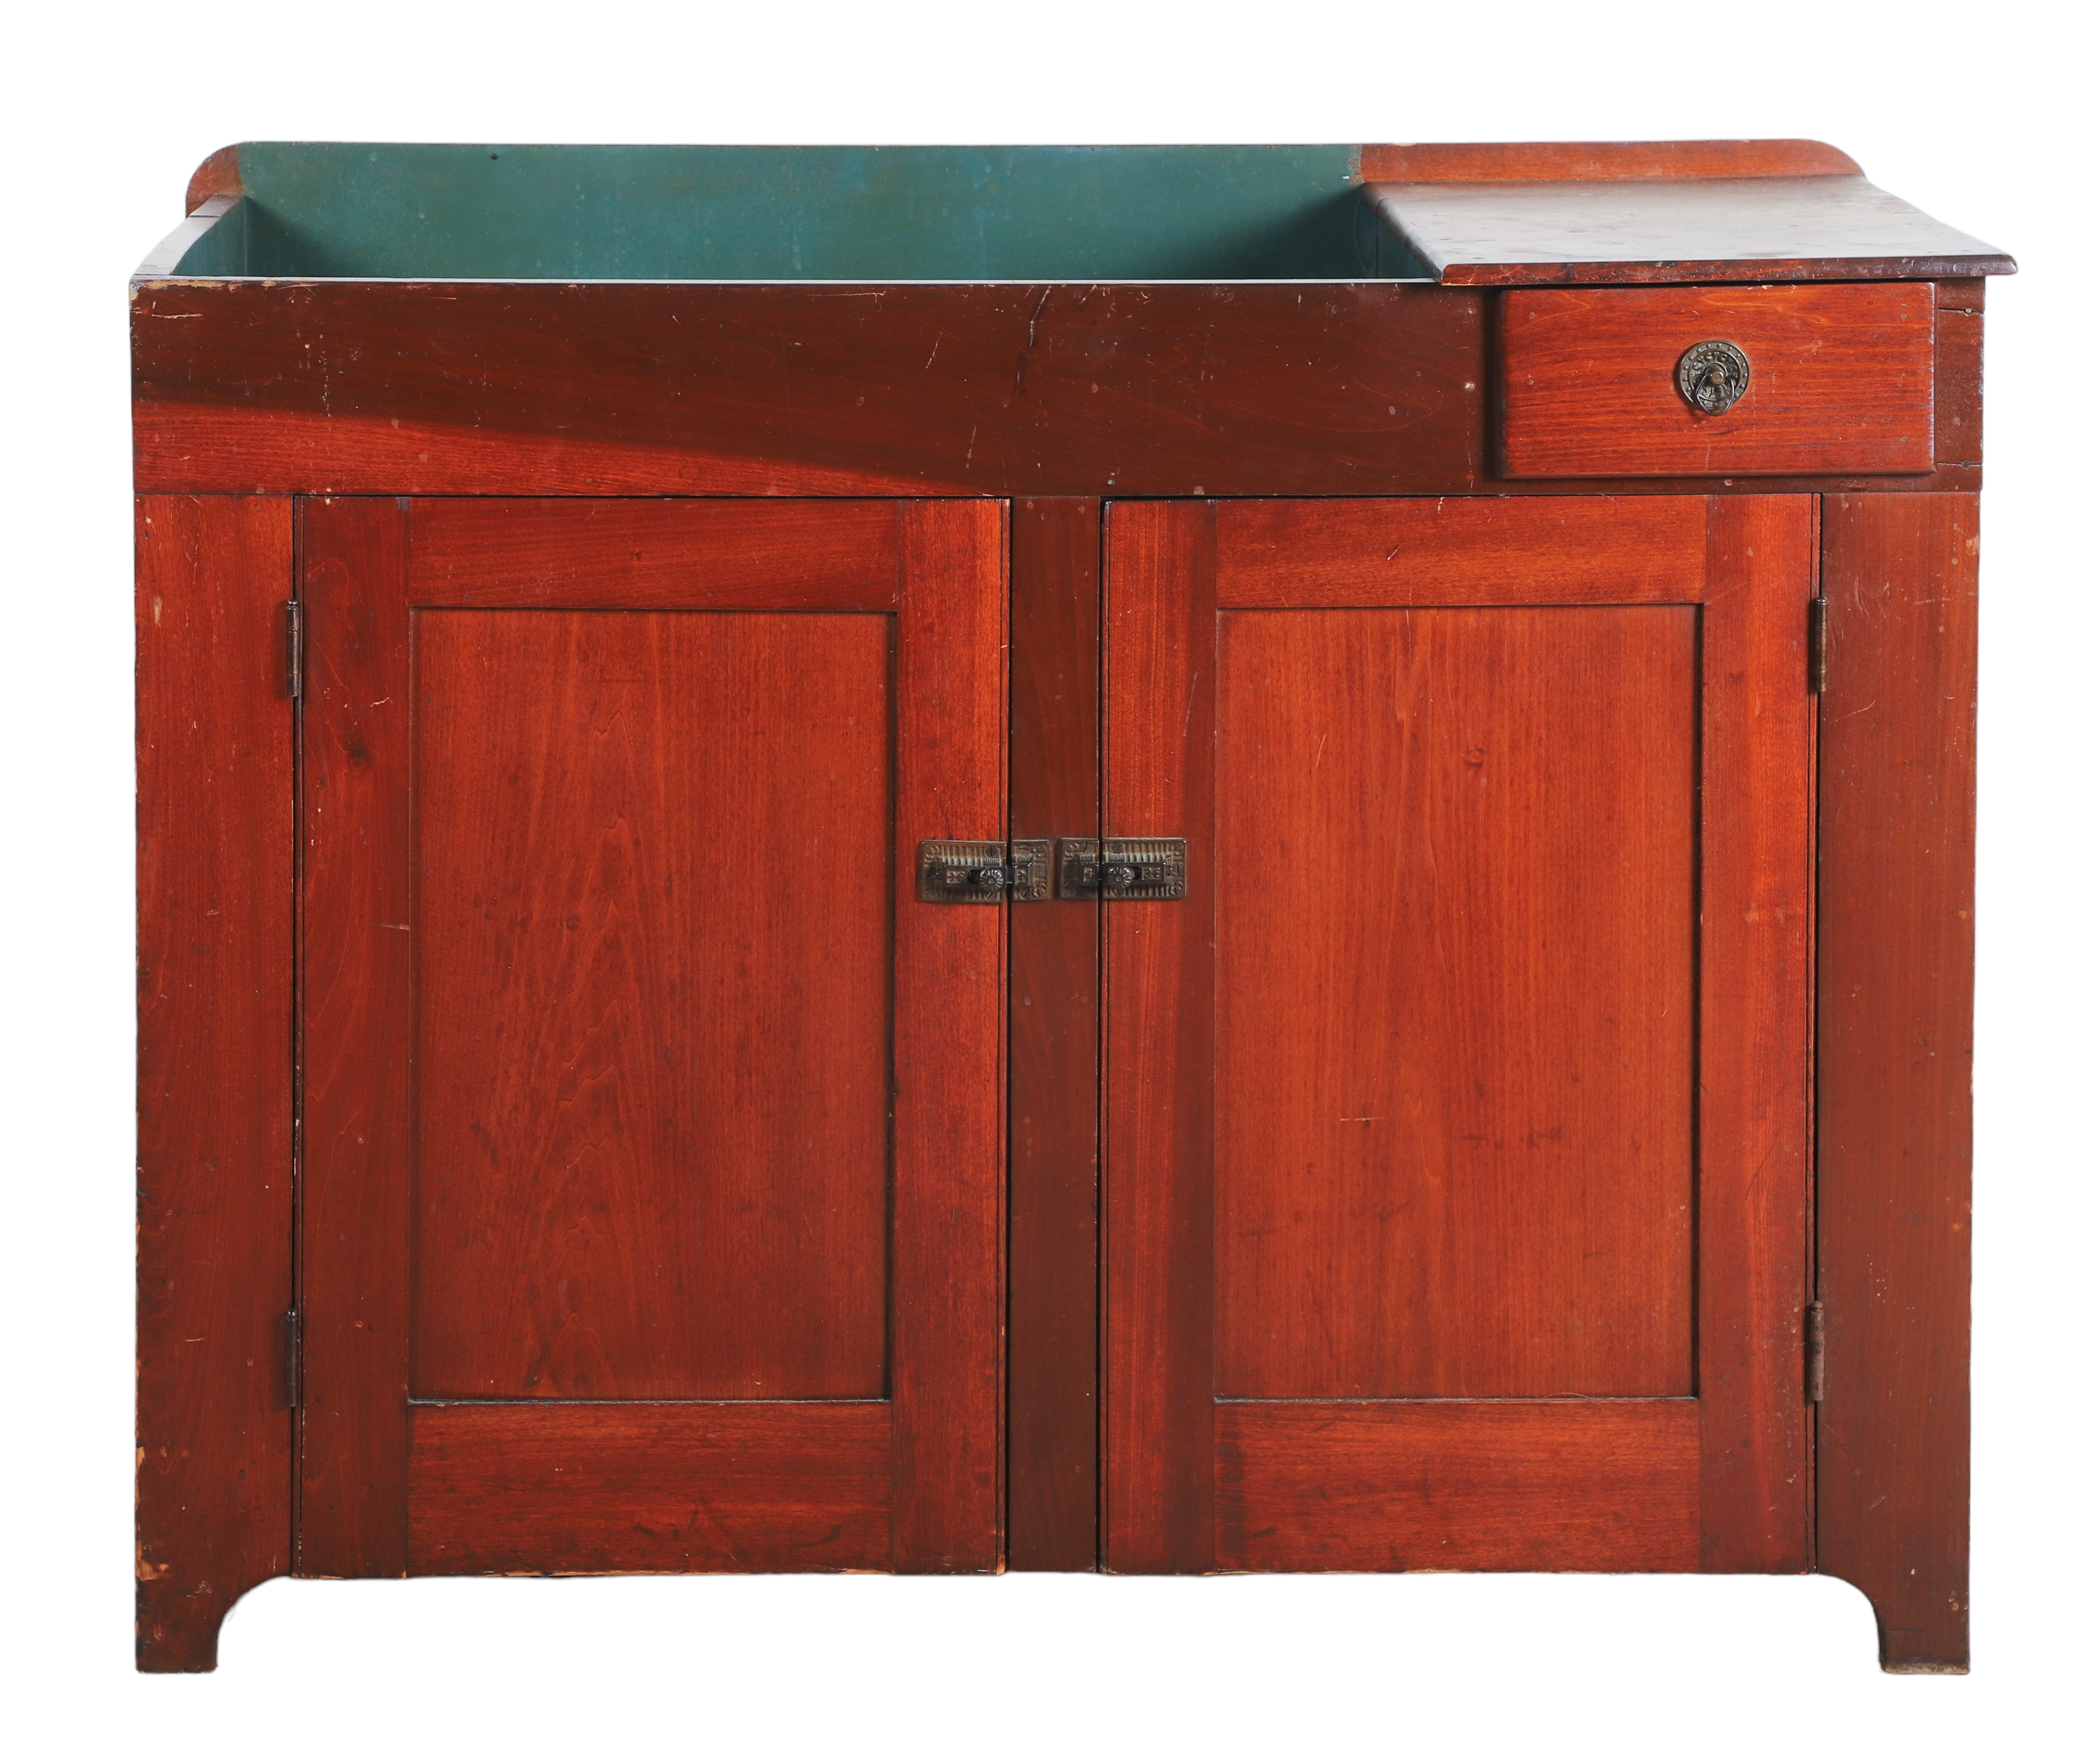 Poplar dry sink, open well with